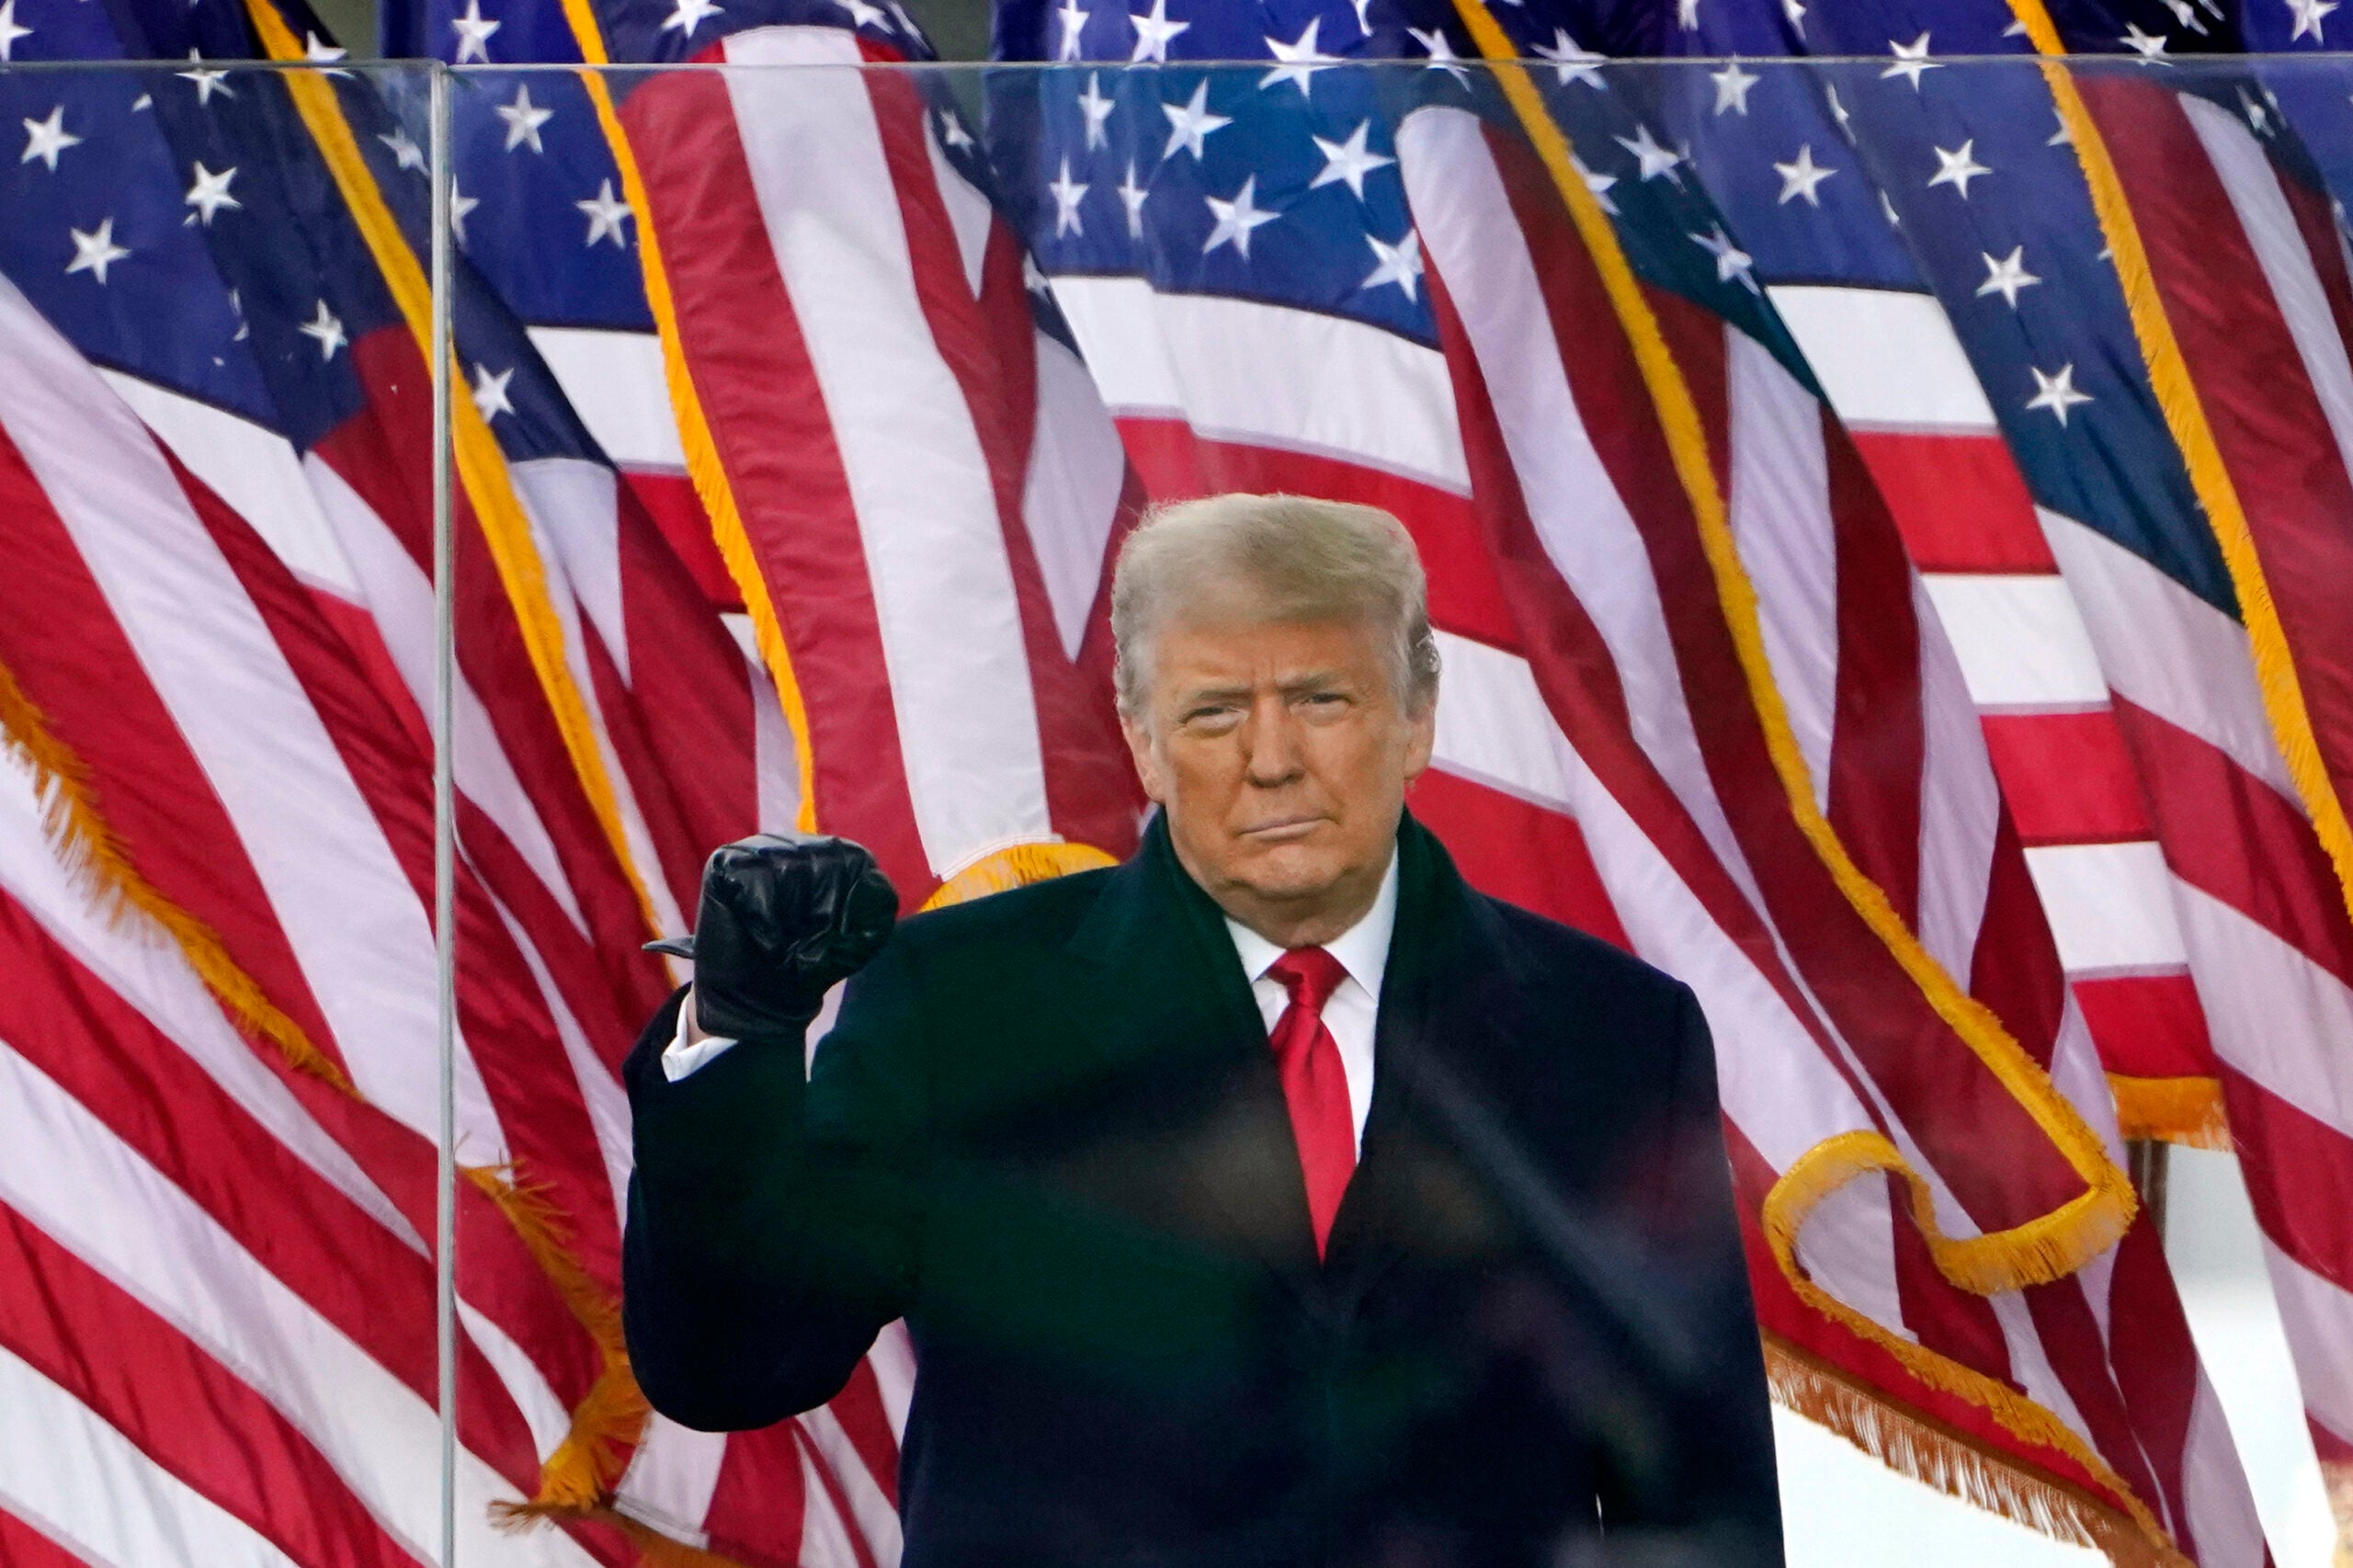 President Donald Trump gestures as he arrives to speak at a rally in Washington, Jan. 6, 2021.